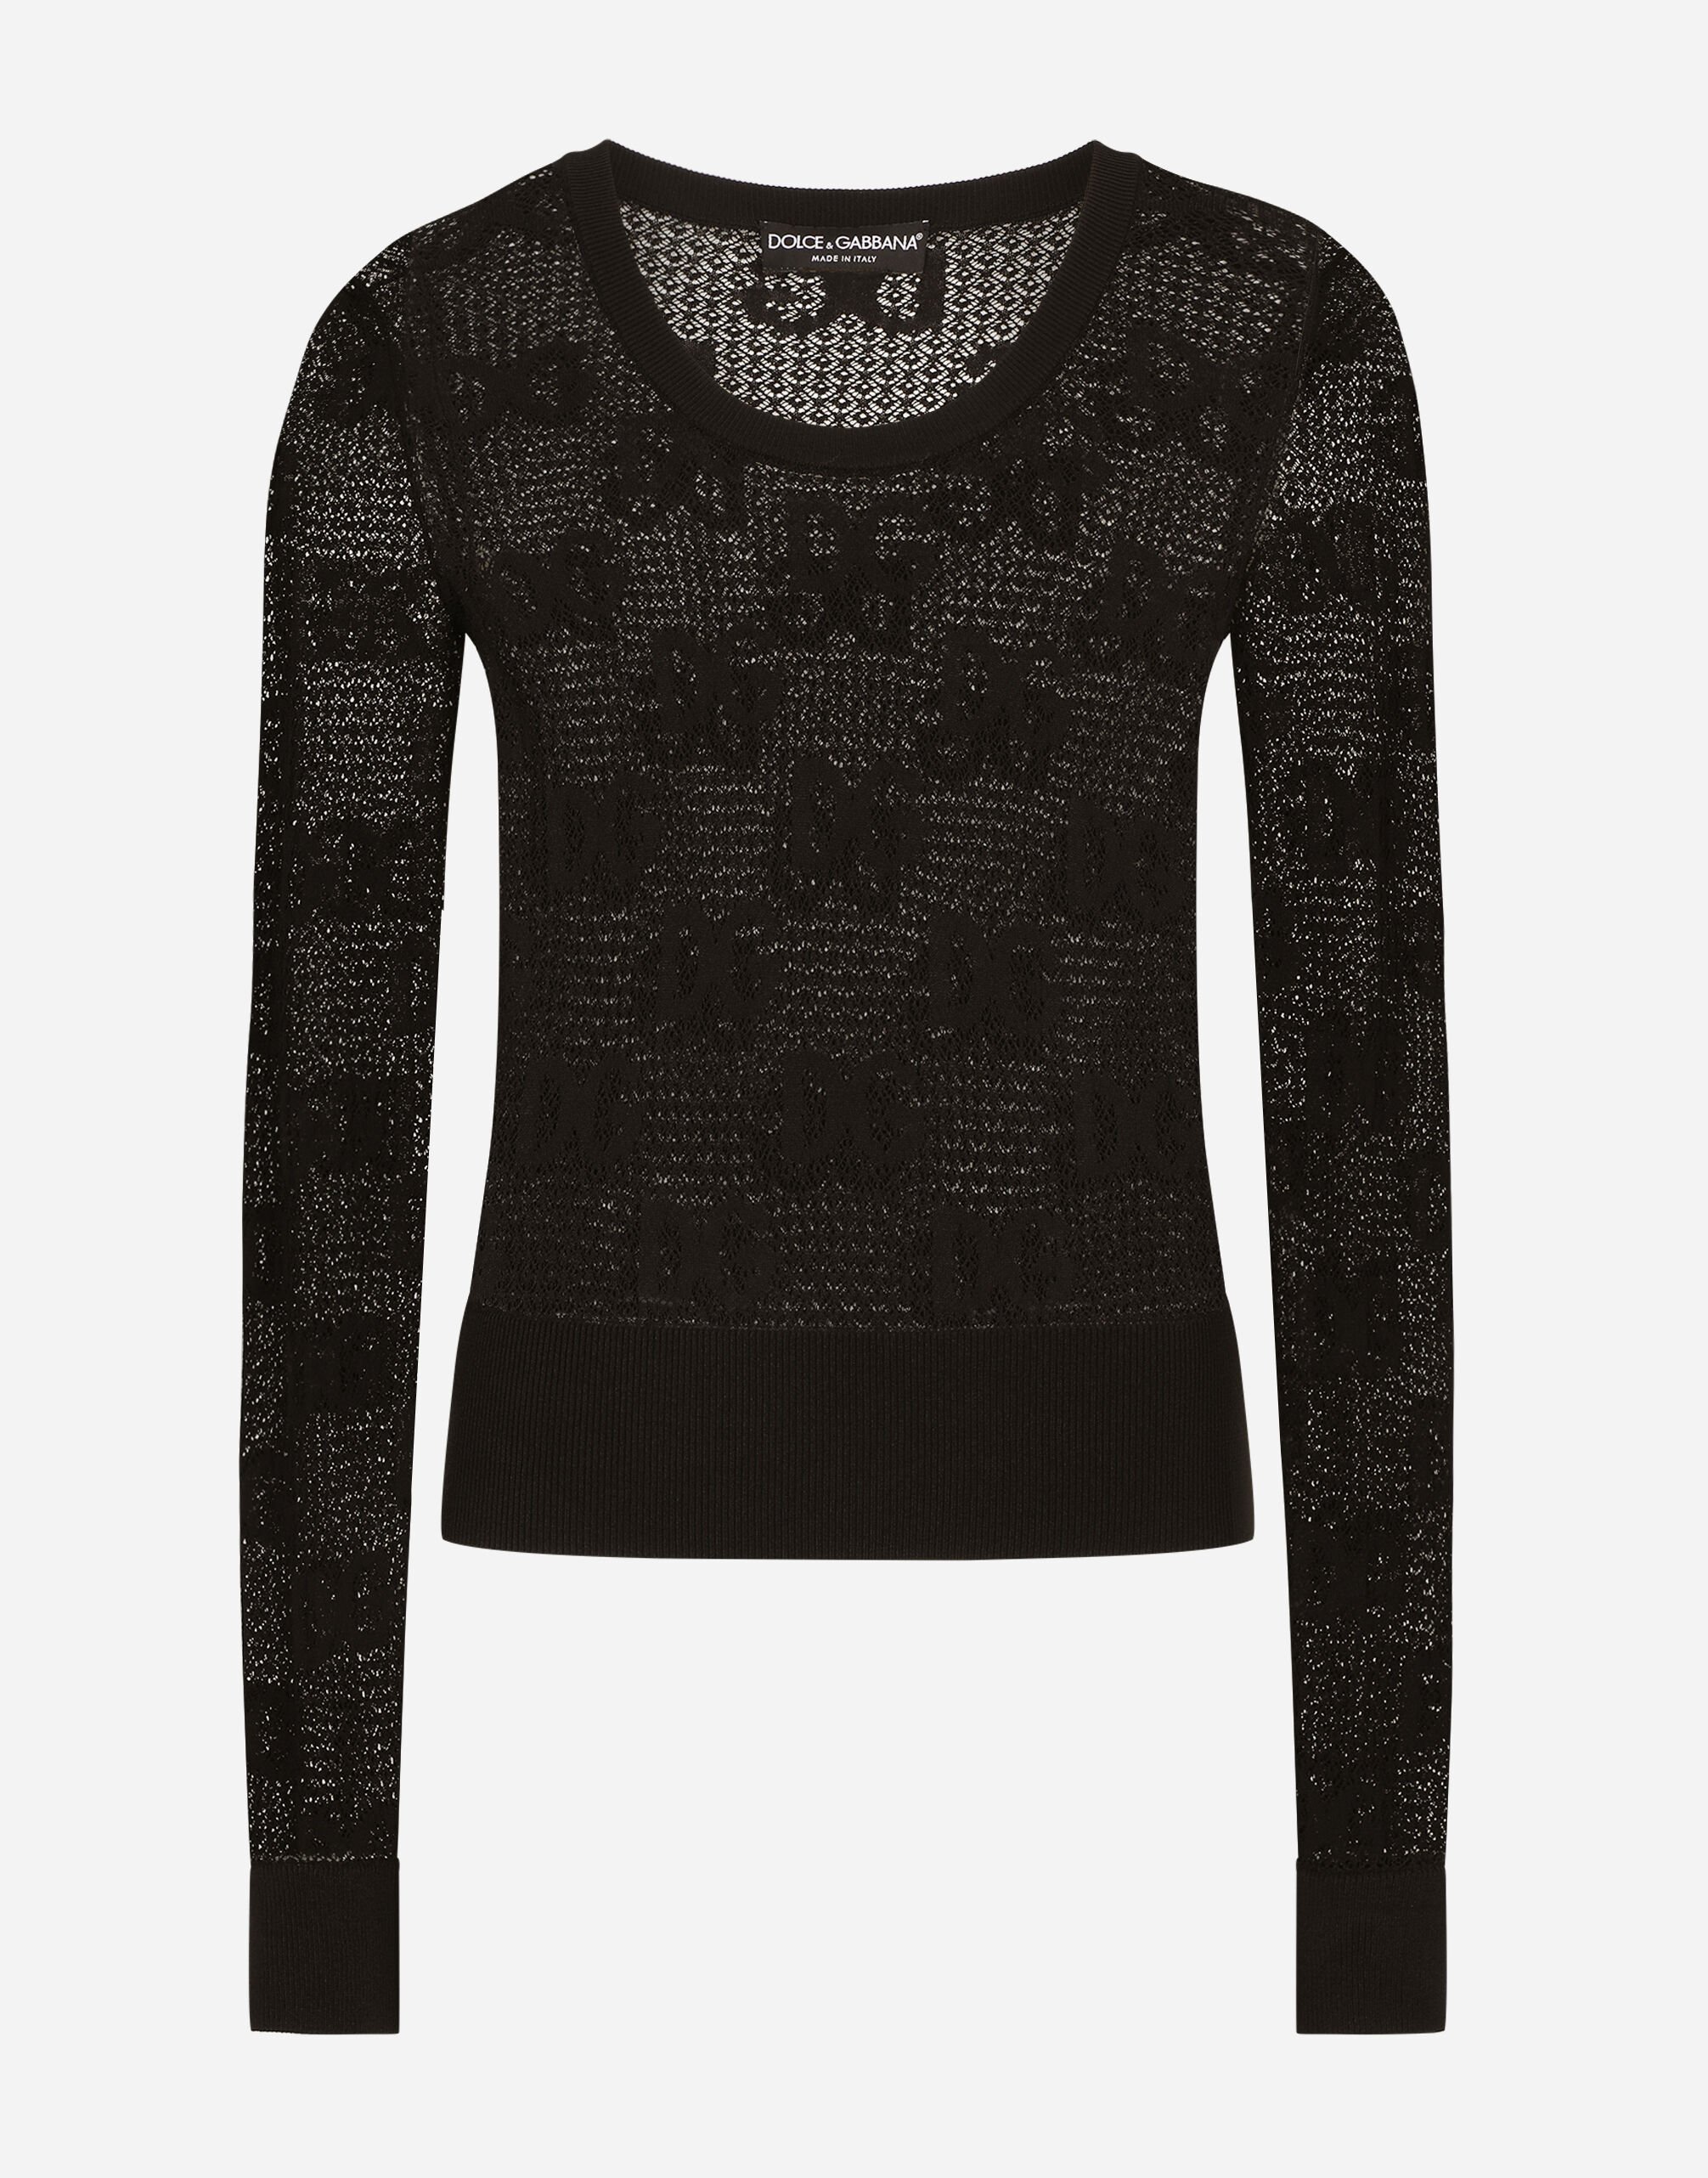 Dolce & Gabbana Long-sleeved lace-stitch sweater with DG logo Multicolor FXI25TJBVX8